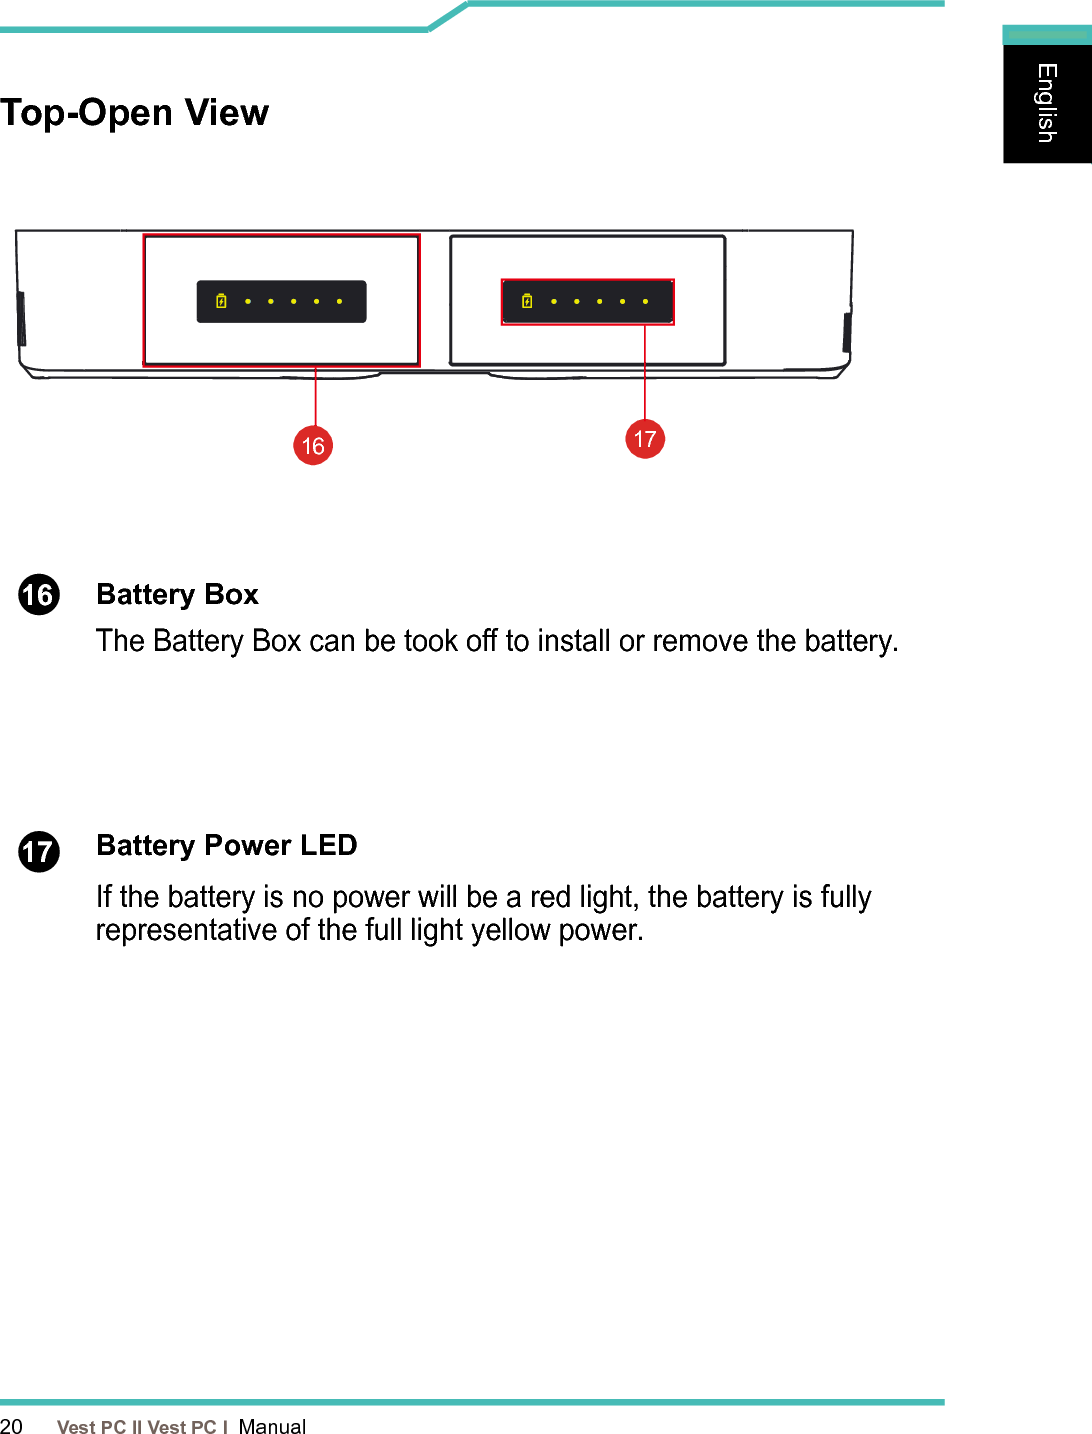 20      Vest PC II Vest PC I  ManualEnglishEnglishEnglish161716 17Top-Open View Battery BoxBattery Power LEDThe Battery Box can be took o to install or remove the battery.If the battery is no power will be a red light, the battery is fully representative of the full light yellow power.